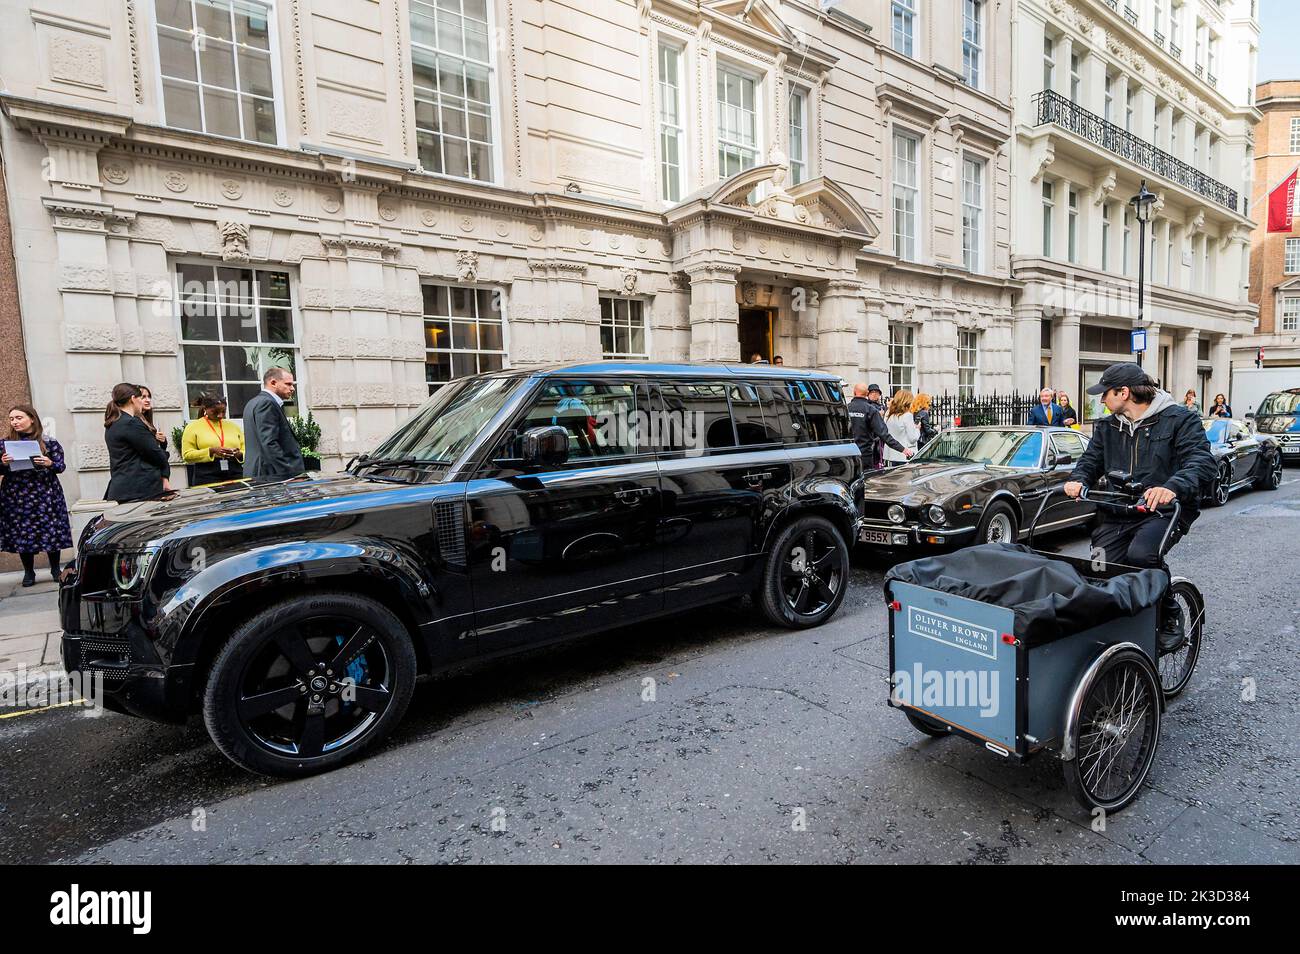 London, UK. 26 Sep 2022. No Time To Die vehicles including a 1981 Aston Martin V8 (estimate: £500,000-700,000), an Aston Martin DBS Superleggera sold to benefit The Royal Foundation of The Duke and Duchess of Cambridge (estimate: £300,000-400,000) and a Land Rover Defender 110 to benefit the British Red Cross (estimate: £300,000-500,000) - To mark the 60th anniversary of the James Bond films, Christie's and EON Productions are holding a charity sale, Sixty Years of James Bond including a total of 60 lots. Credit: Guy Bell/Alamy Live News Stock Photo